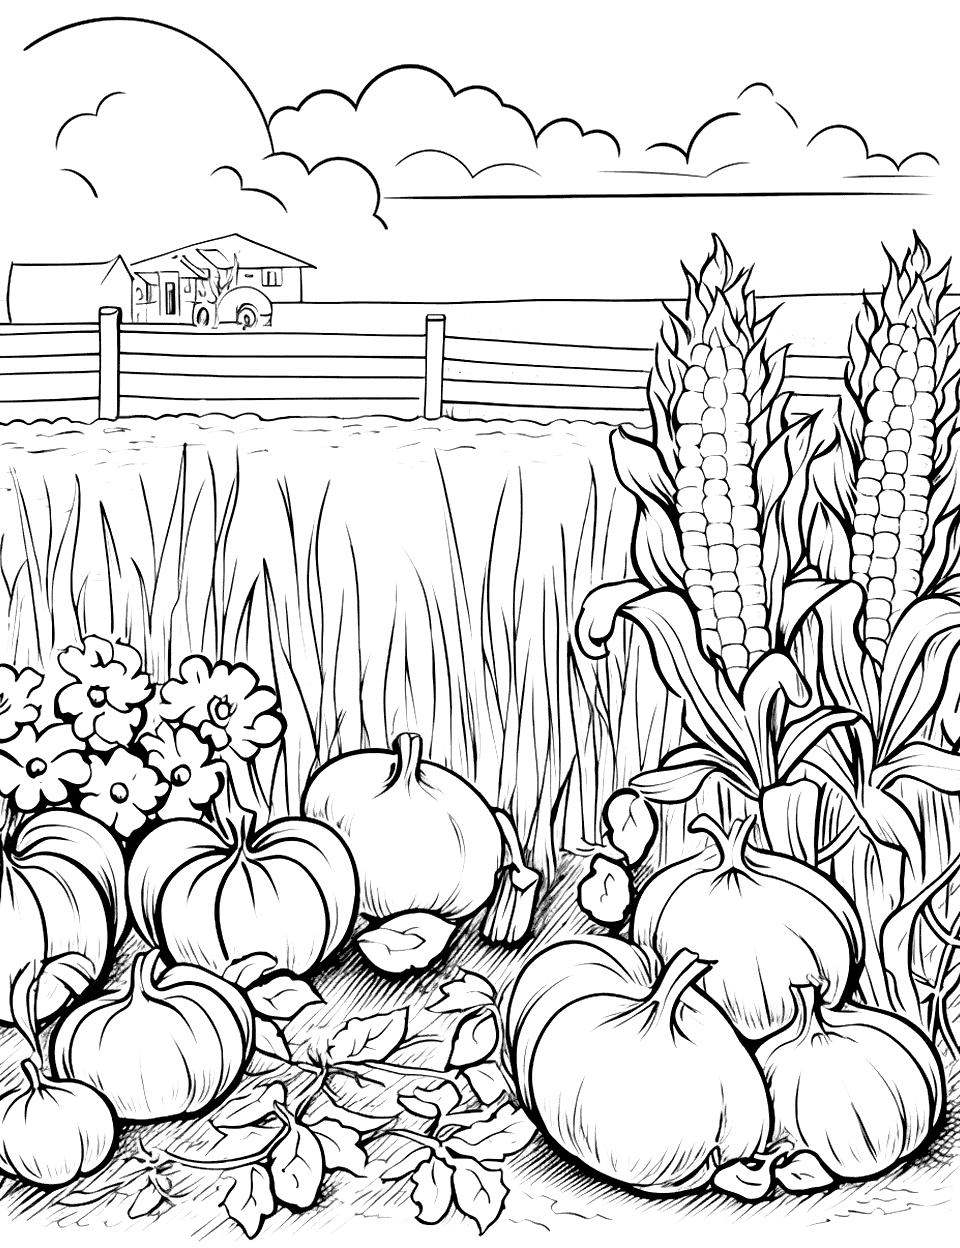 Summer Vegetable Garden Farm Coloring Page - A vegetable garden with different veggies ready to be picked.